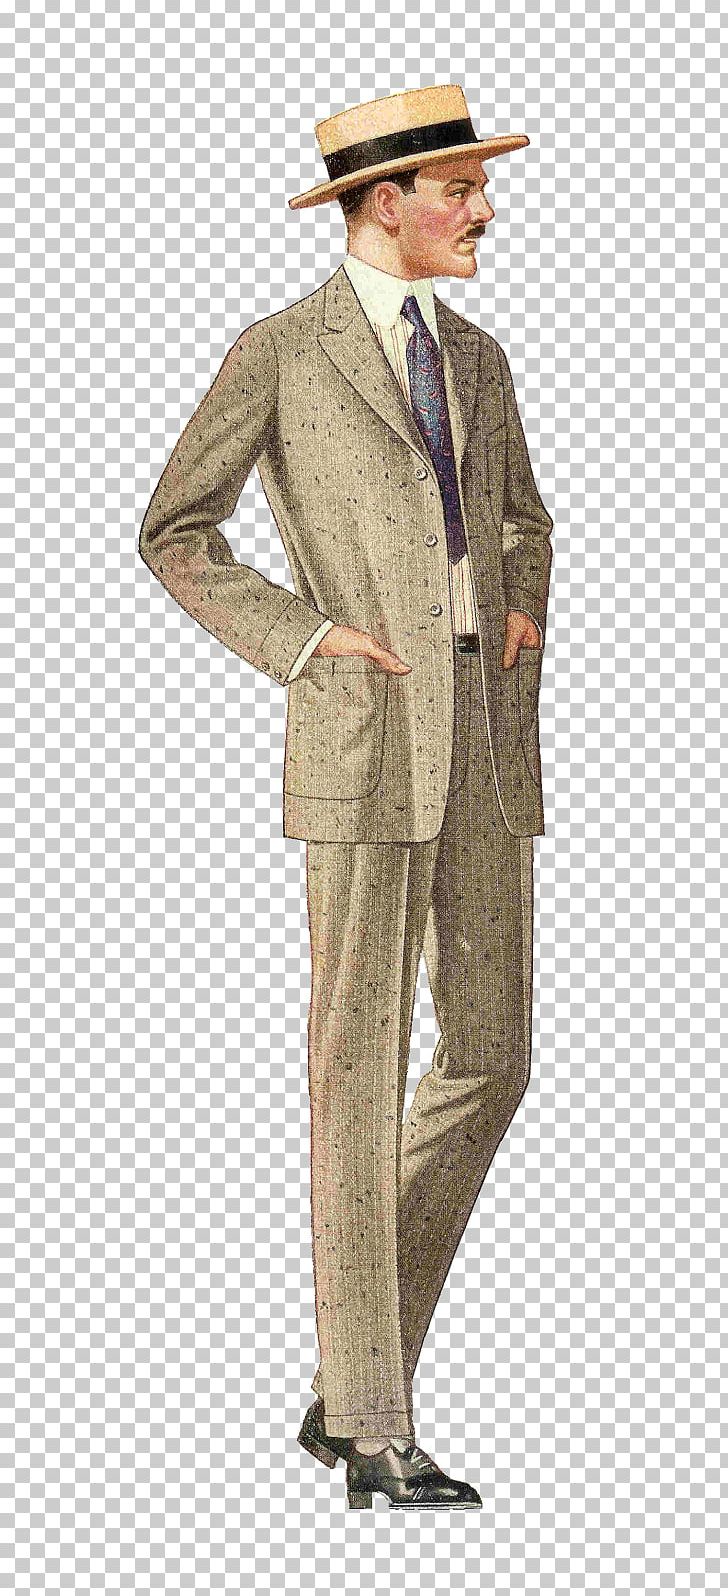 1920s Edwardian Era 1940s 1930s Suit PNG, Clipart, 1900s In Western Fashion, 1920s, 1930s, 1940s, Business Free PNG Download